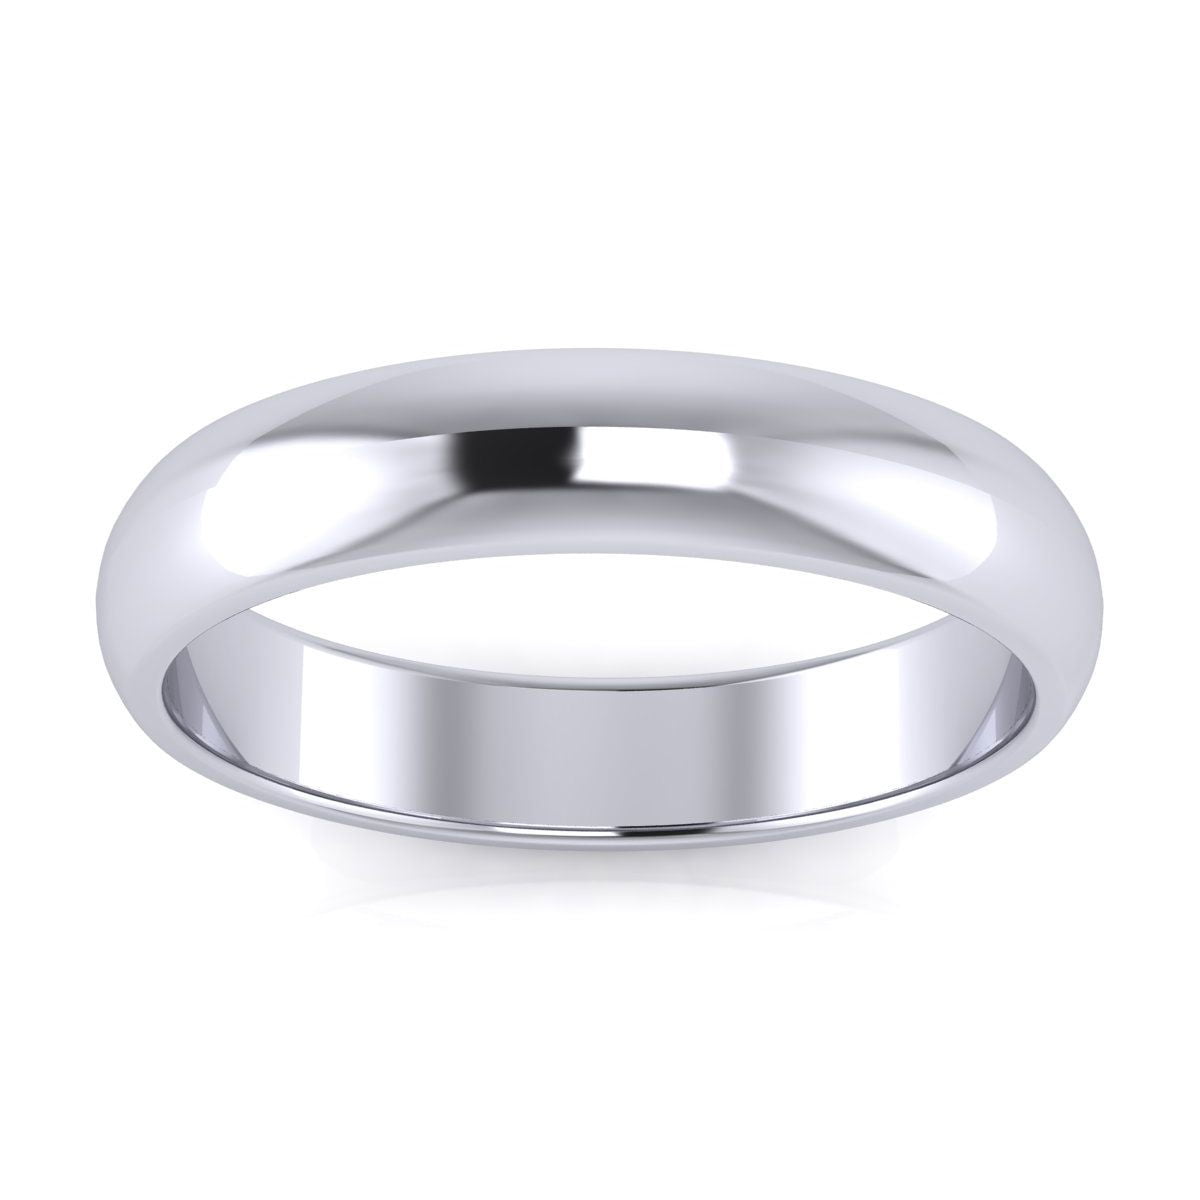 Flat Plain Wedding Band SOLID .925 Sterling Silver All sizes 4-14 TOP SELLER! 